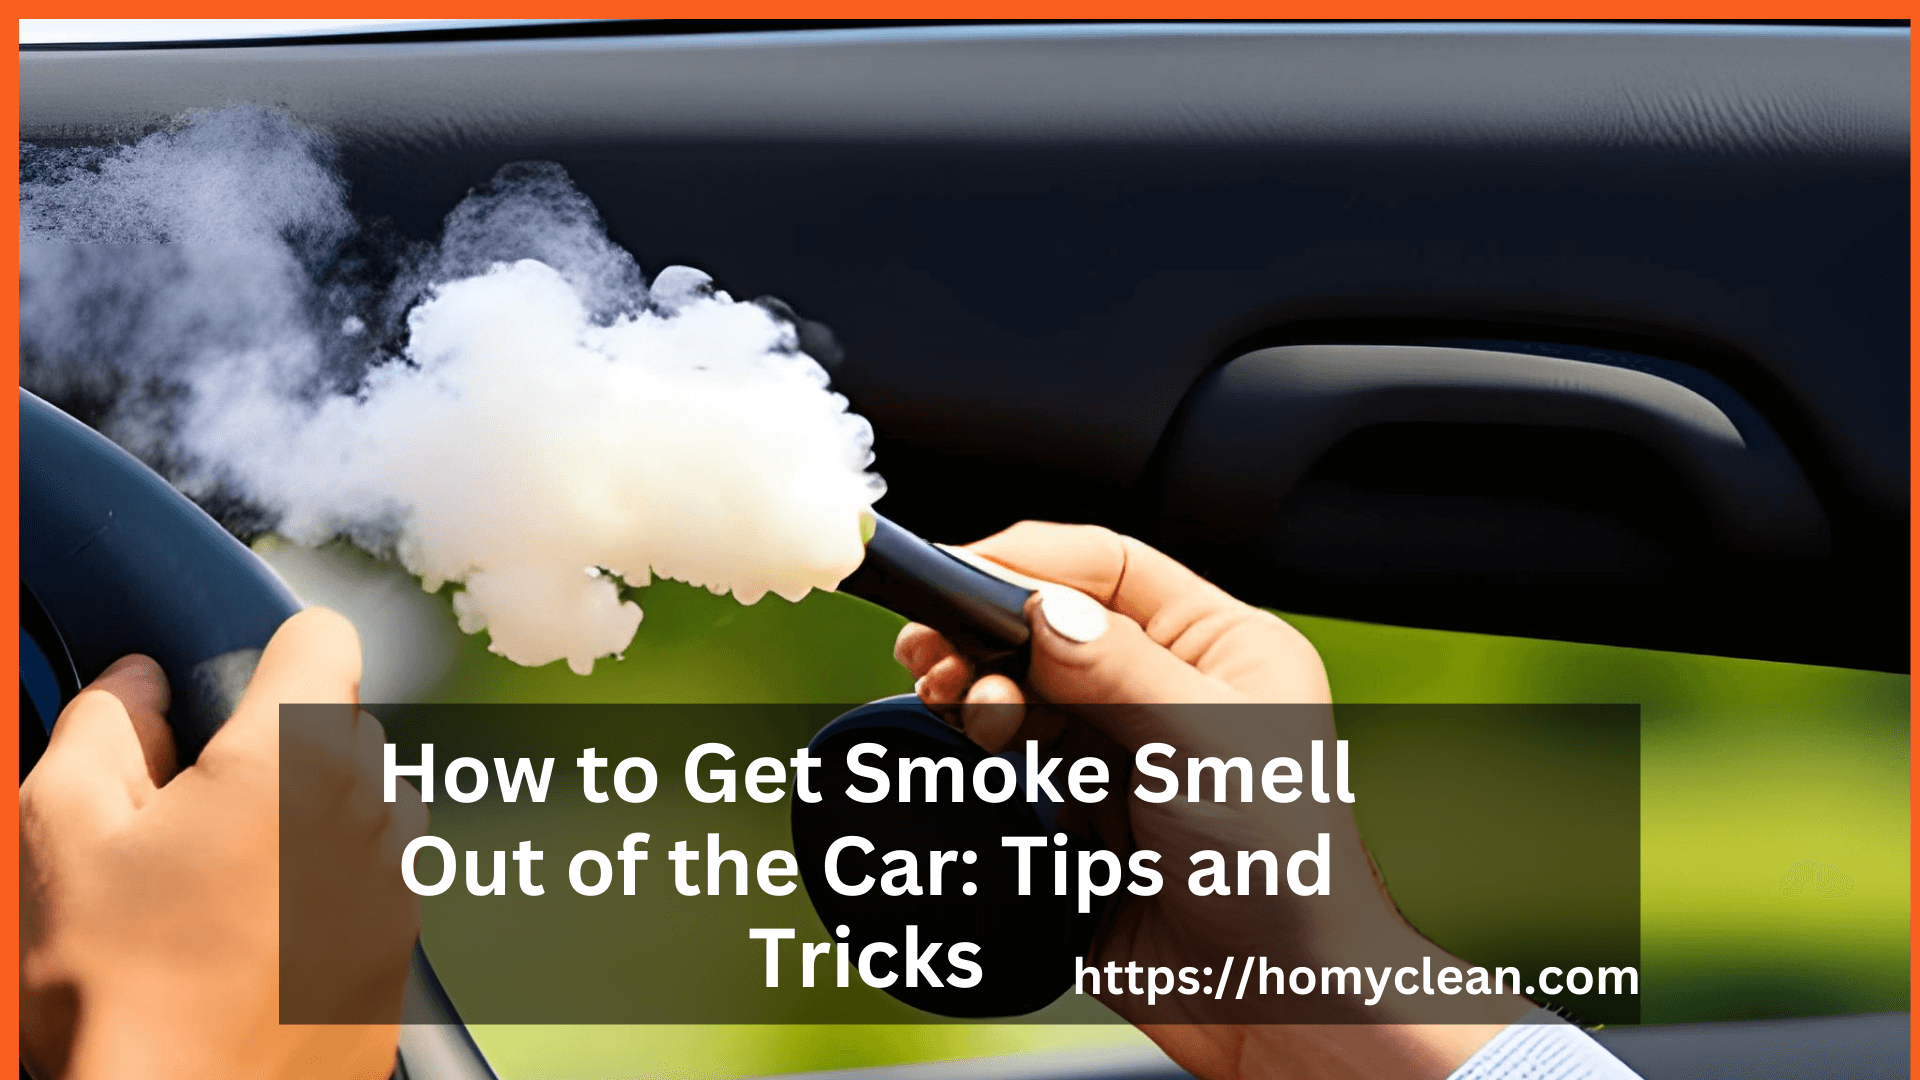 How to Get Smoke Smell Out of Car: Tips and Tricks